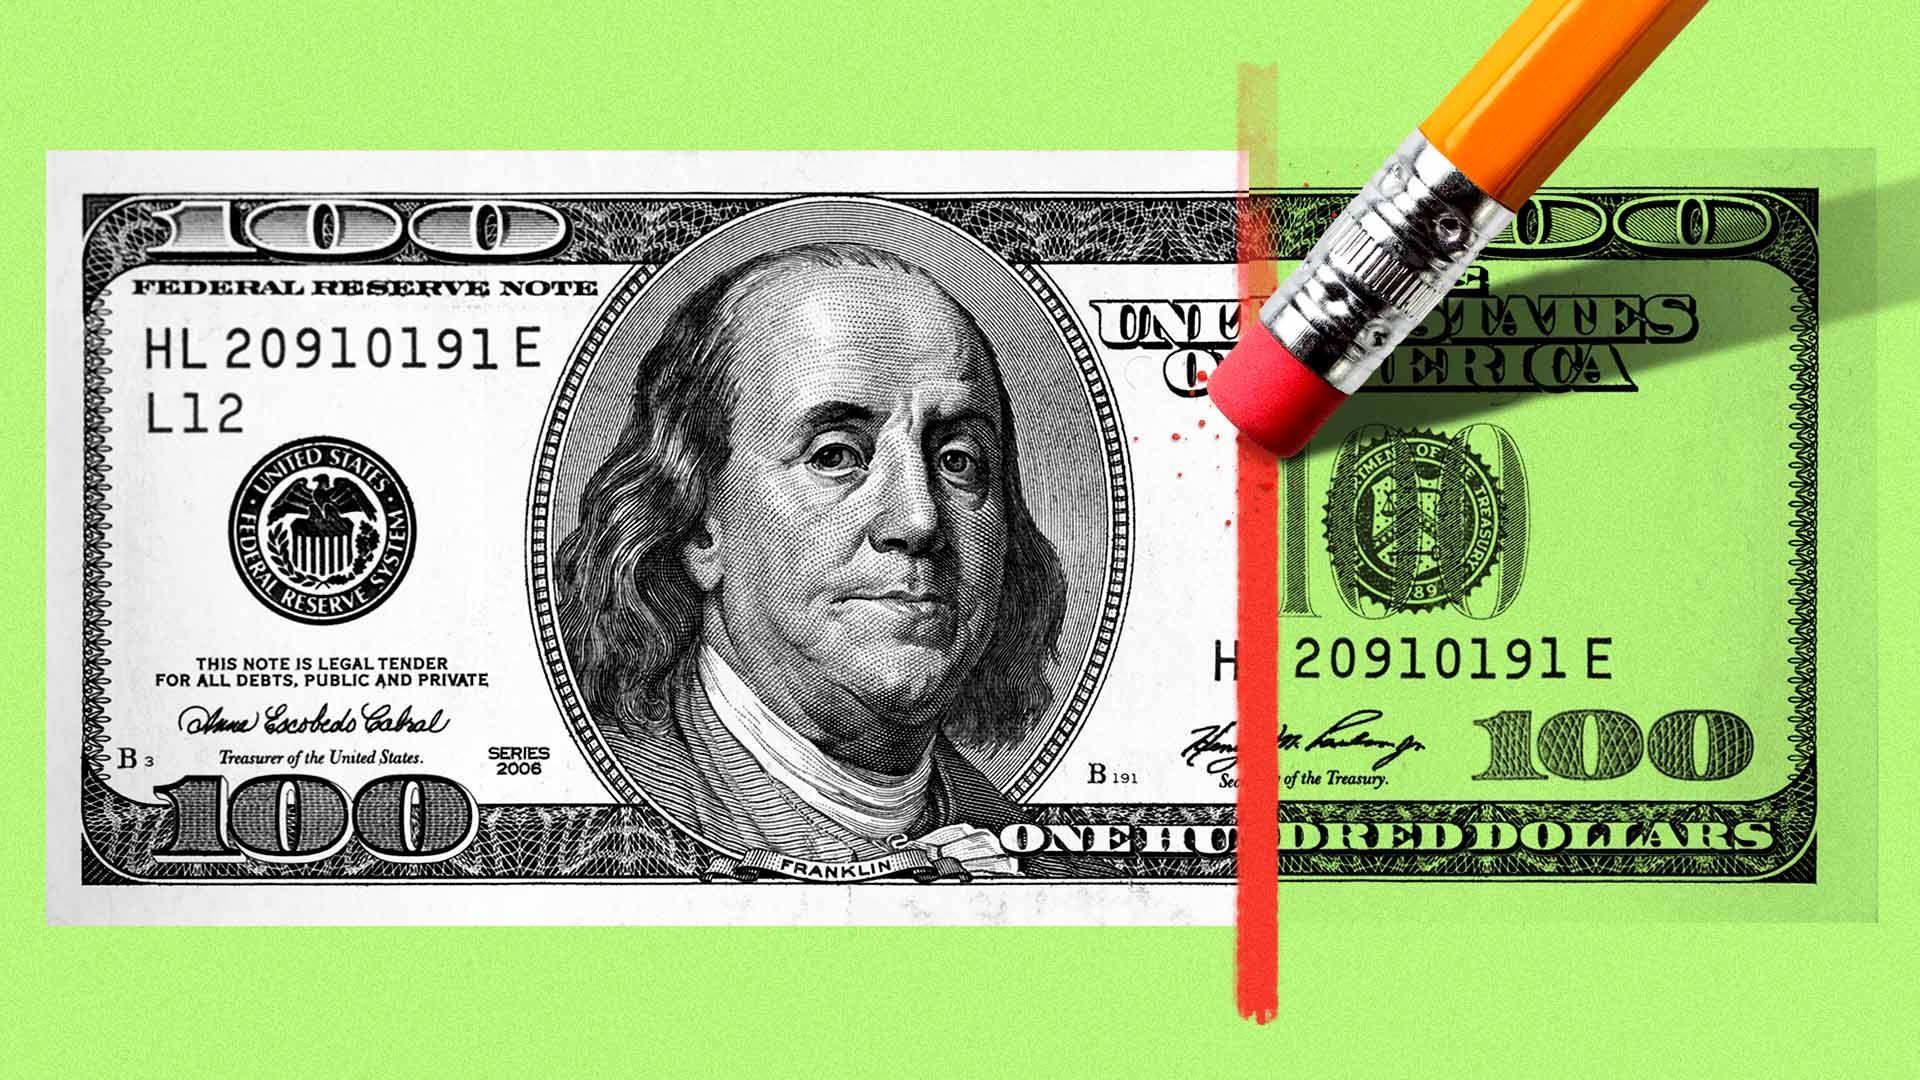 Illustration of a hundred dollar bill with a red line across it being erased by a pencil